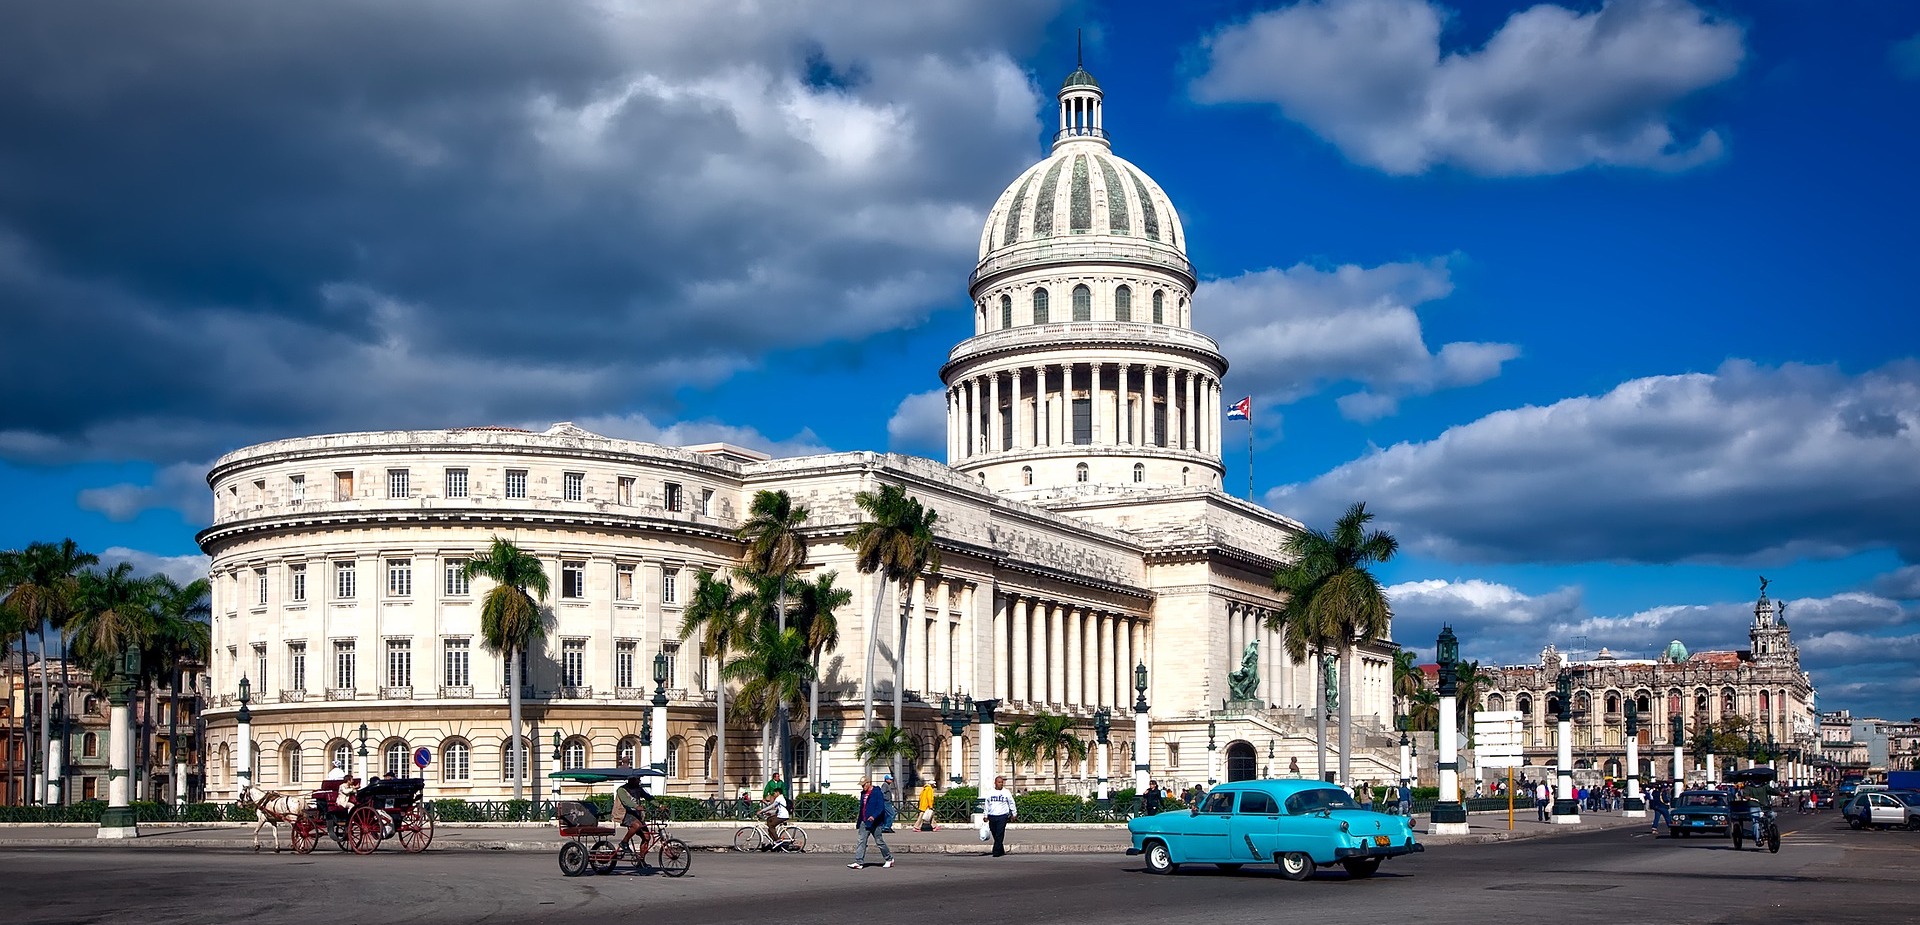 El Capitolio with a dome and palm trees